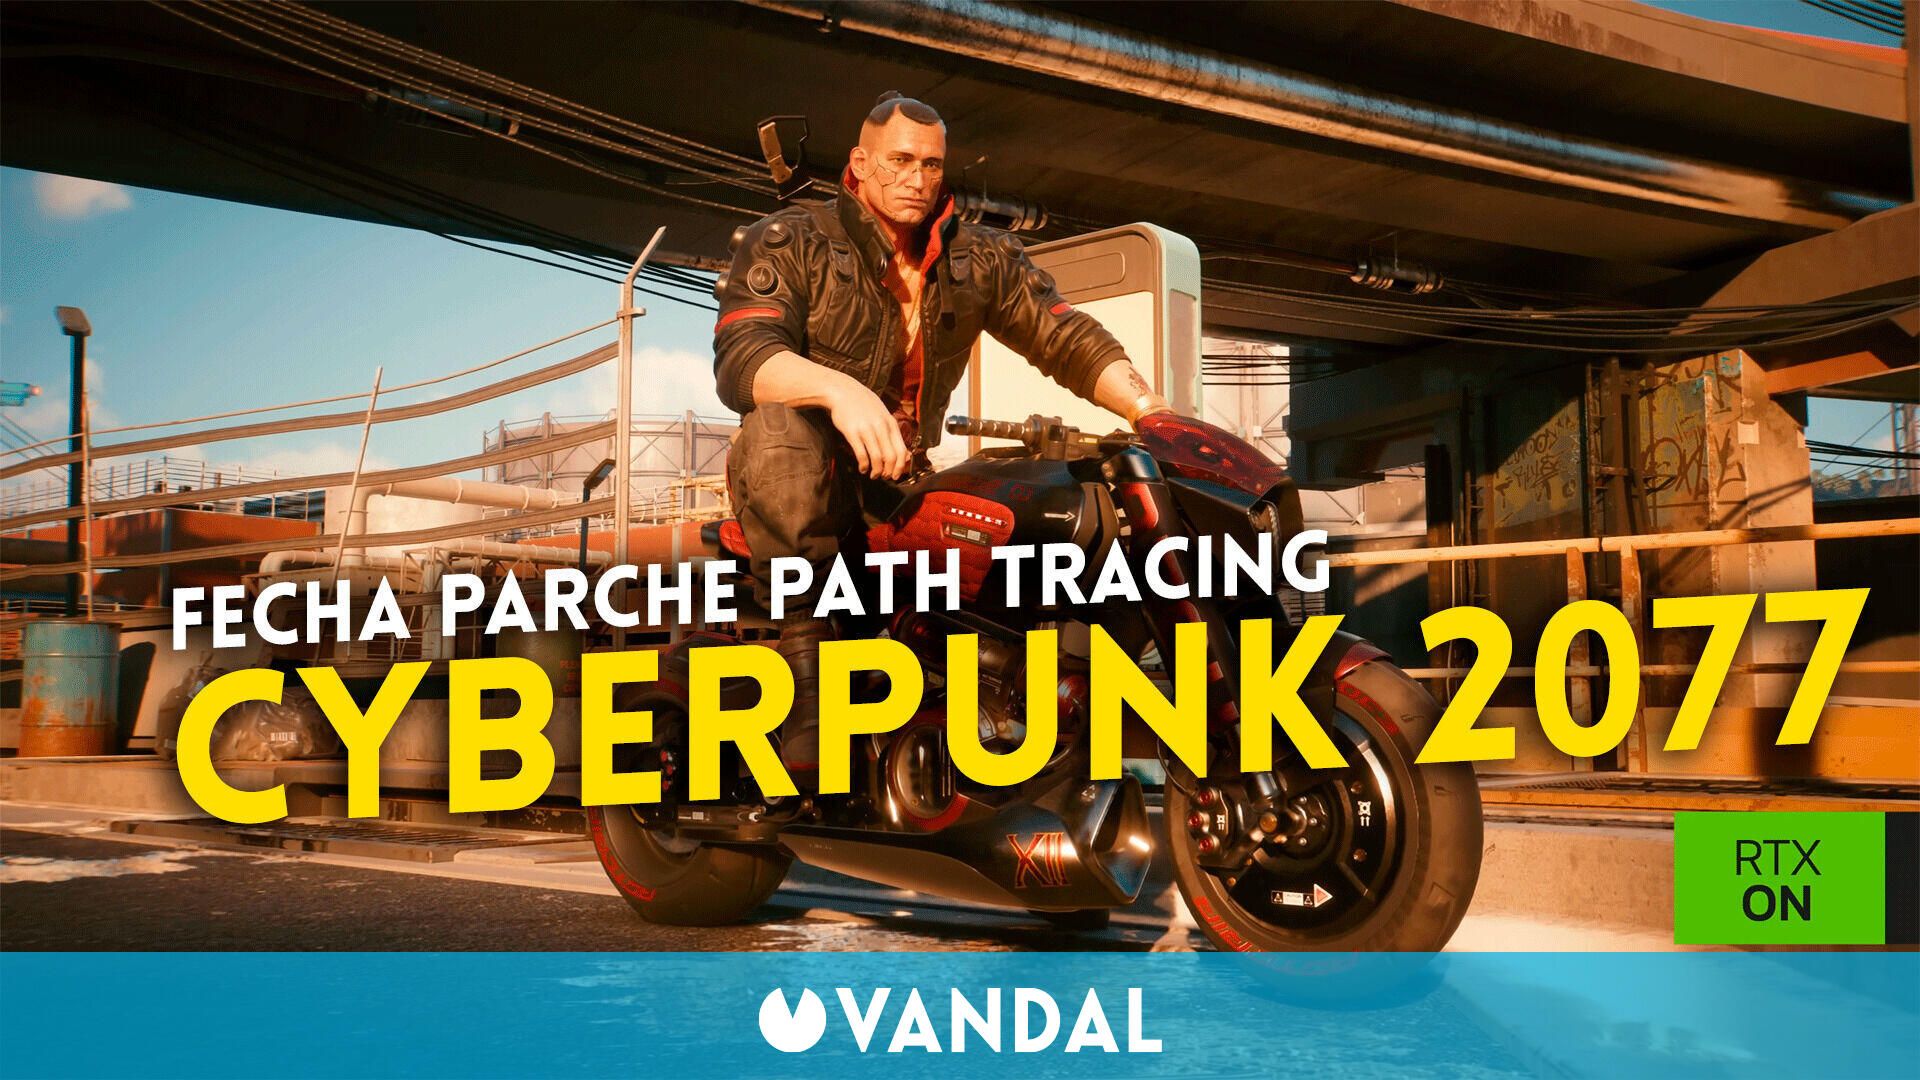 Cyberpunk 2077 already has a date for the amazing Ray Tracing Overdrive mode